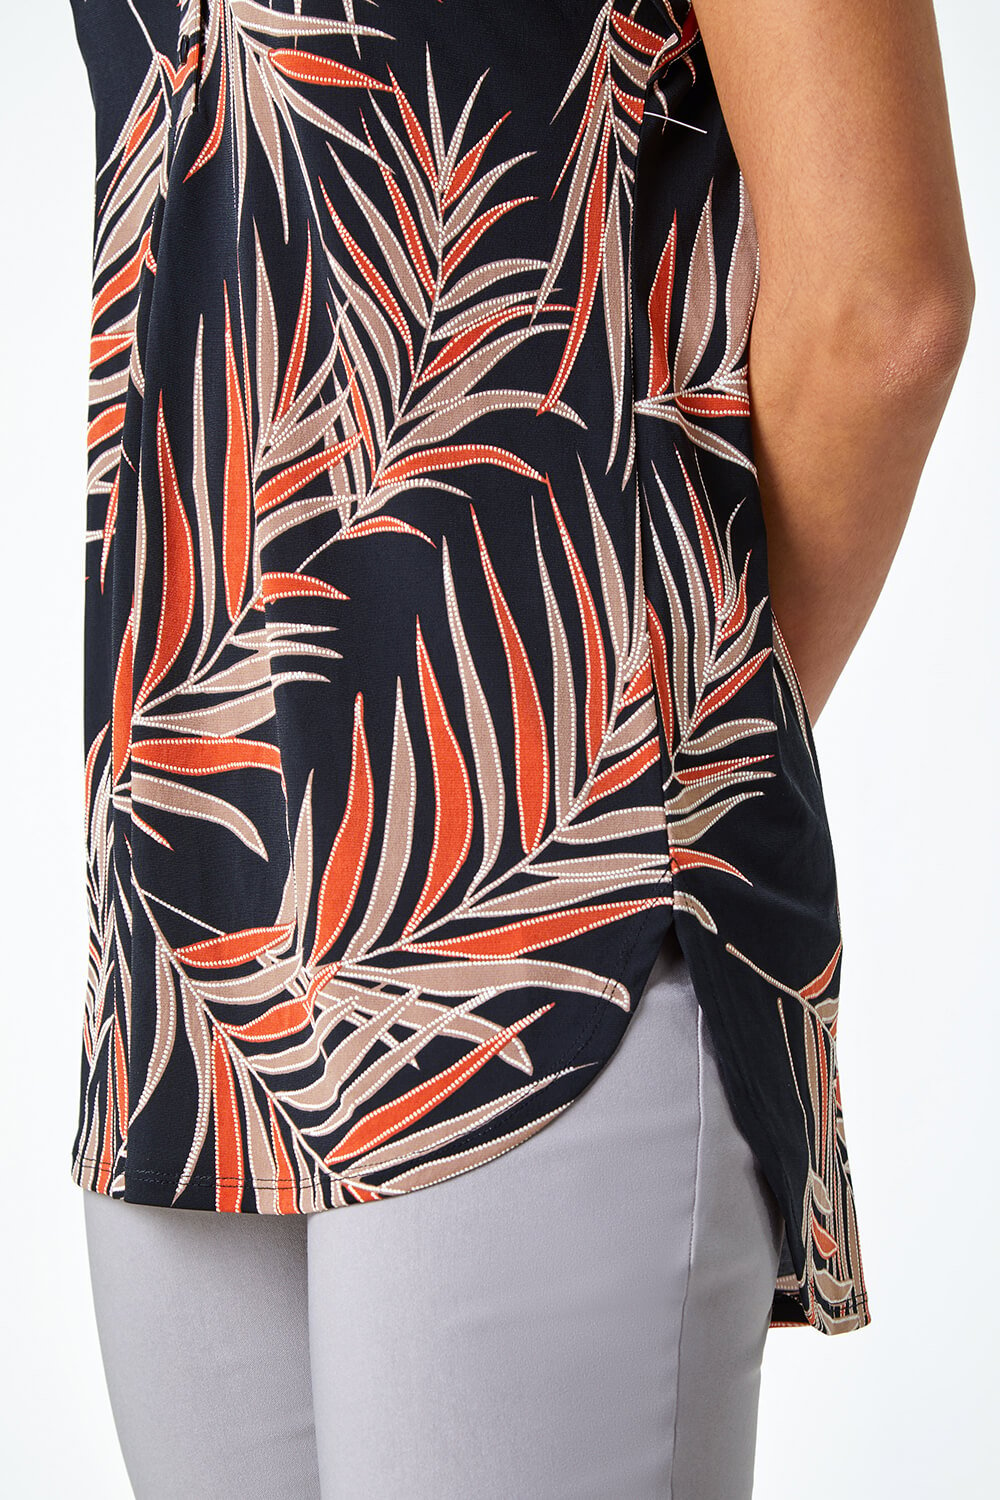 Rust Textured Tropical Print Overshirt Stretch Top, Image 5 of 5